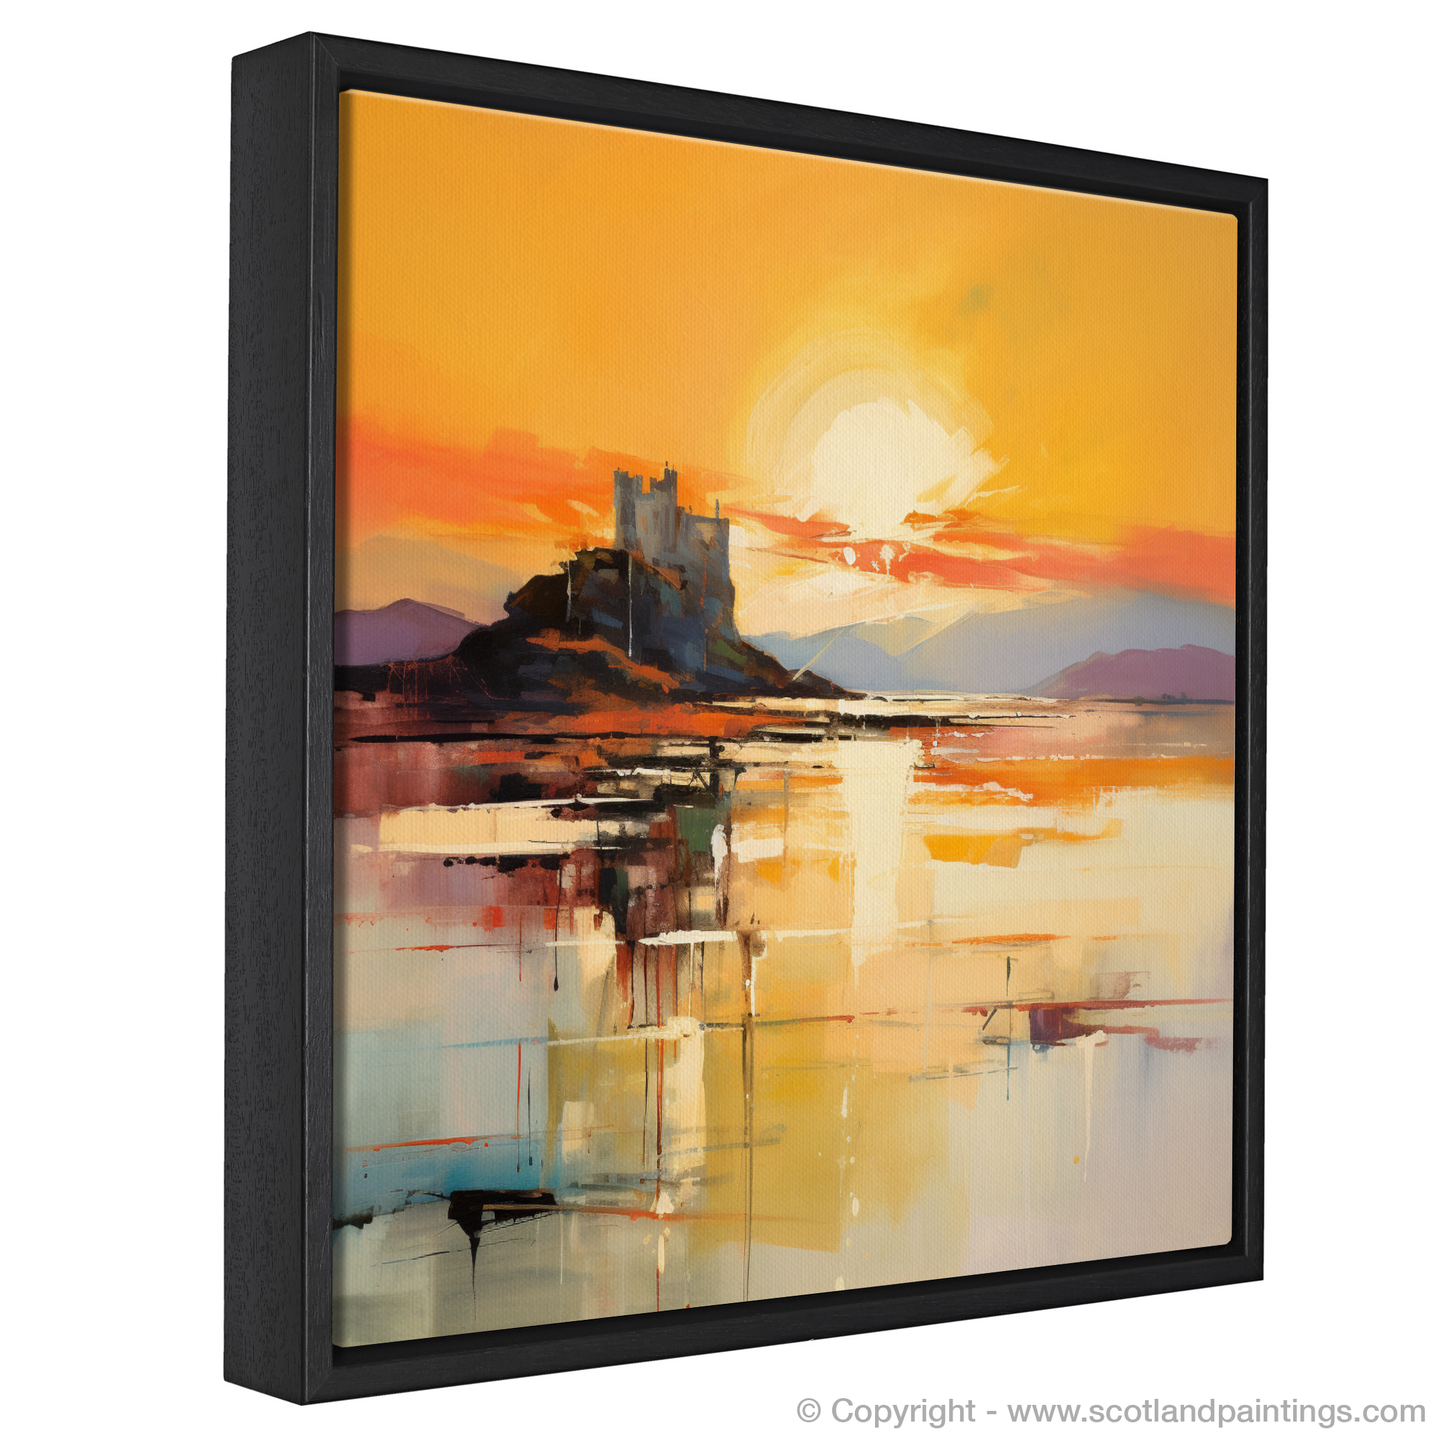 Golden Hour at Castle Stalker Bay - An Abstract Ode to Scottish Coves